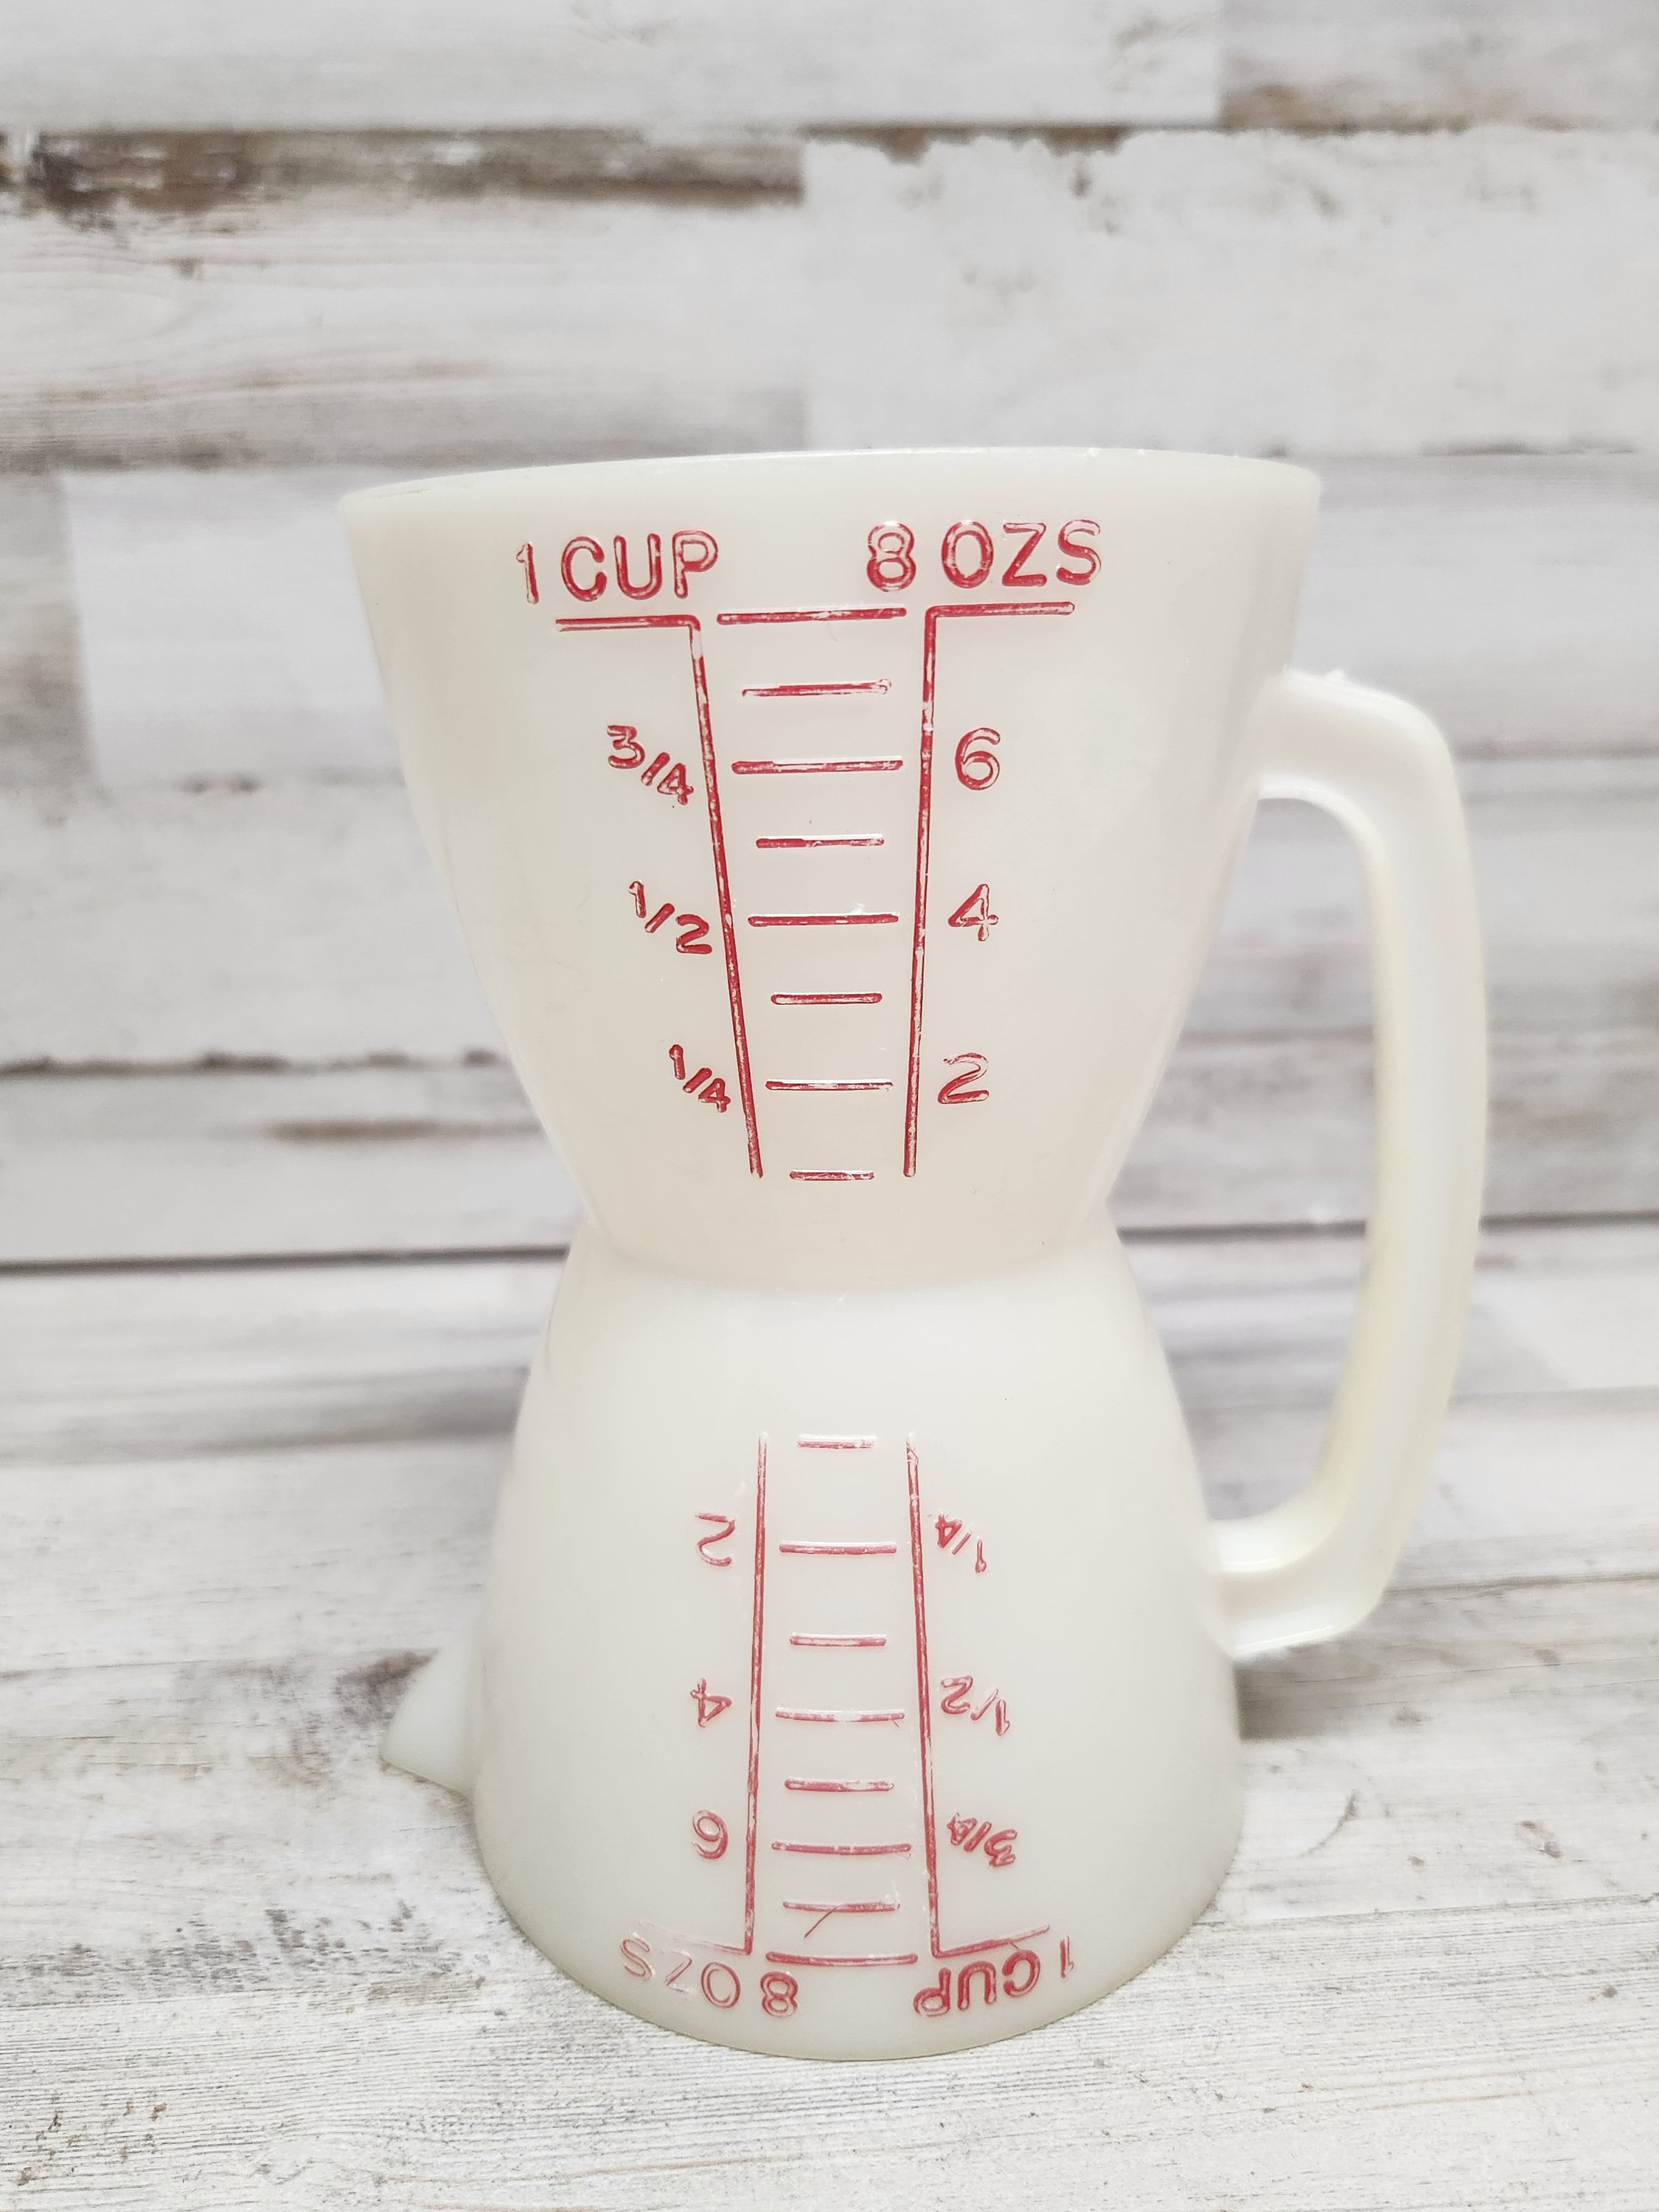 Vintage Tupperware Measuring Cup Set of 6 Cups Classic Sheer White